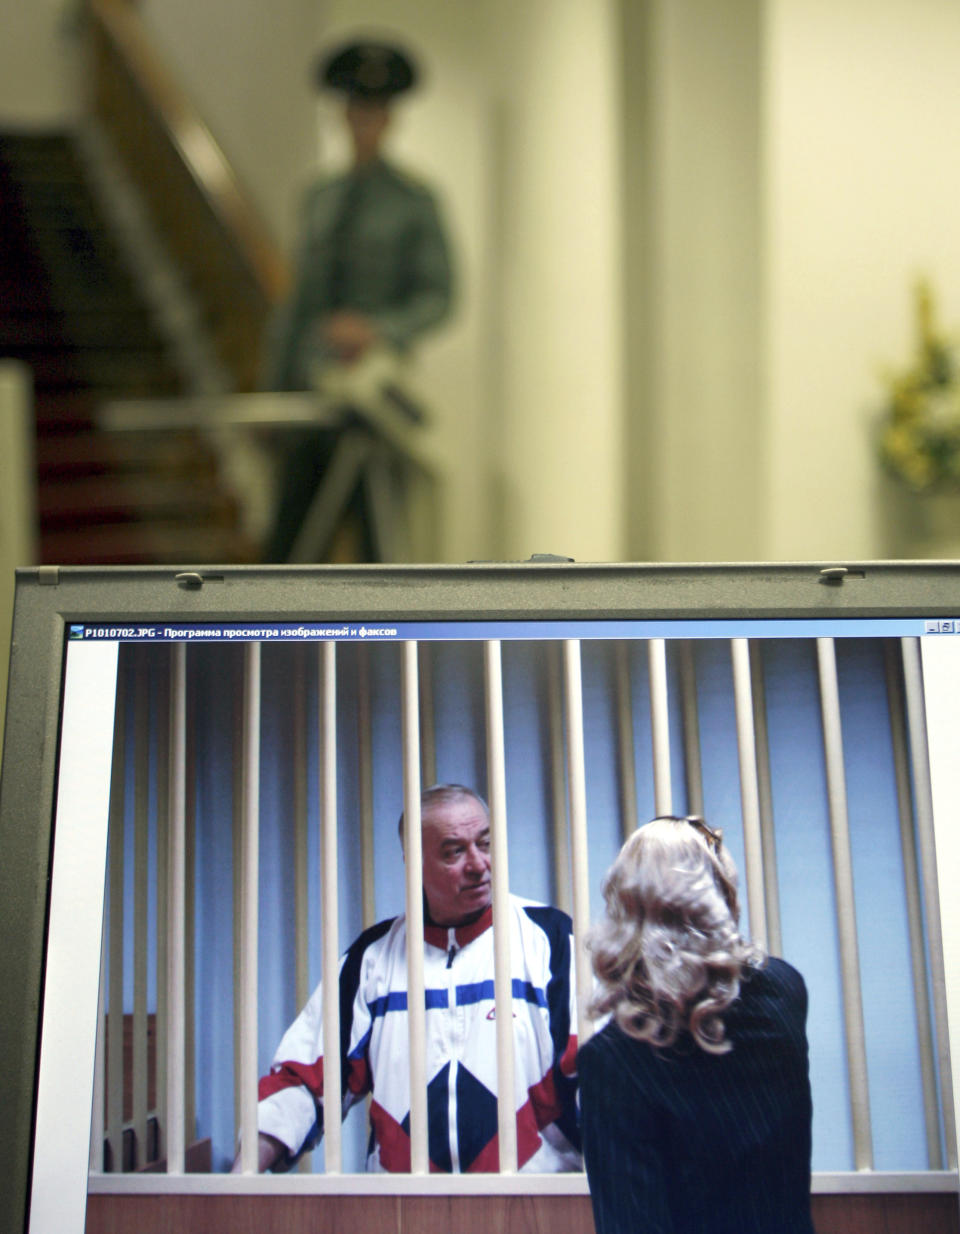 FILE - Sergei Skripal, left, is seen on a screen speaking to his lawyer from behind bars in Moscow on Aug. 9, 2006. Later released from prison in a spy swap, Skripal defected to Britain. He and his daughter, Yulia, were found slumped on a bench in Salisbury, England, in March 2018. British investigators said they had been poisoned with a Russian-developed nerve agent and blamed Moscow for the attack. Moscow denied the allegations. (AP Photo/Misha Japaridze)